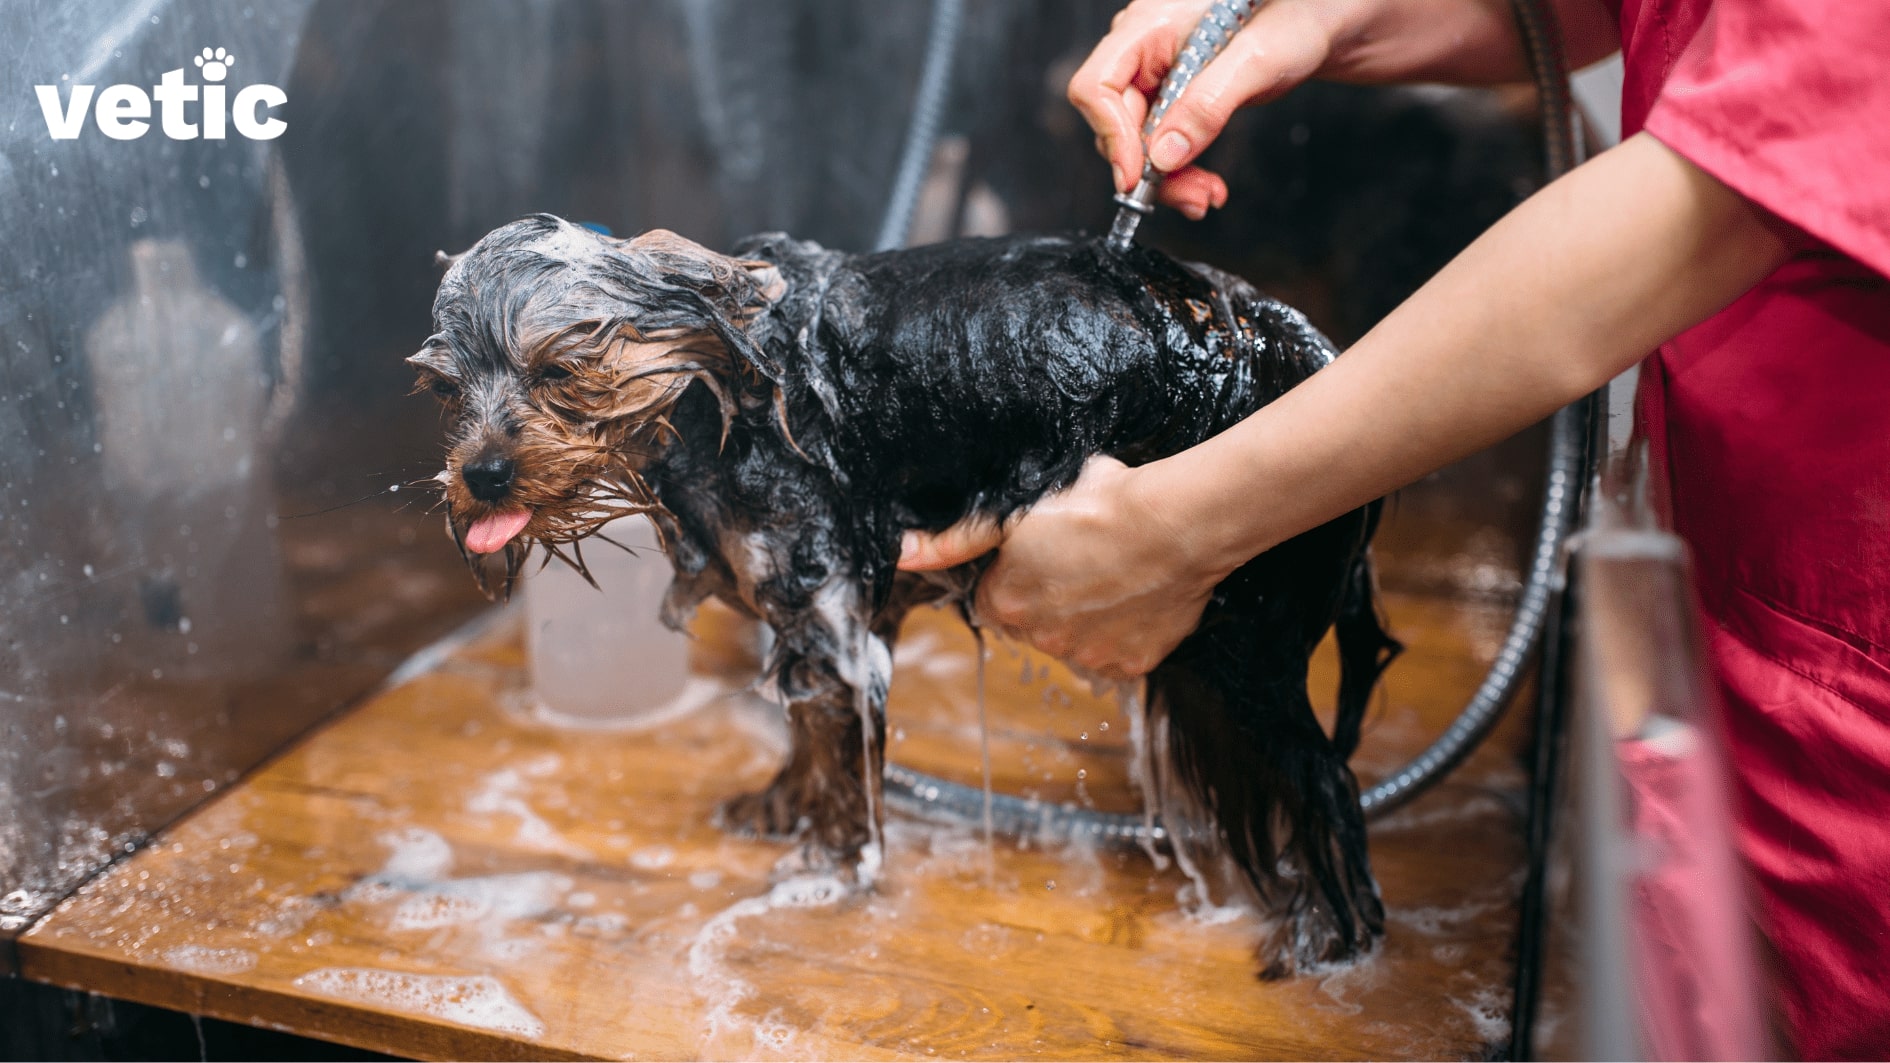 Shih Tzu being bathed by a groomer